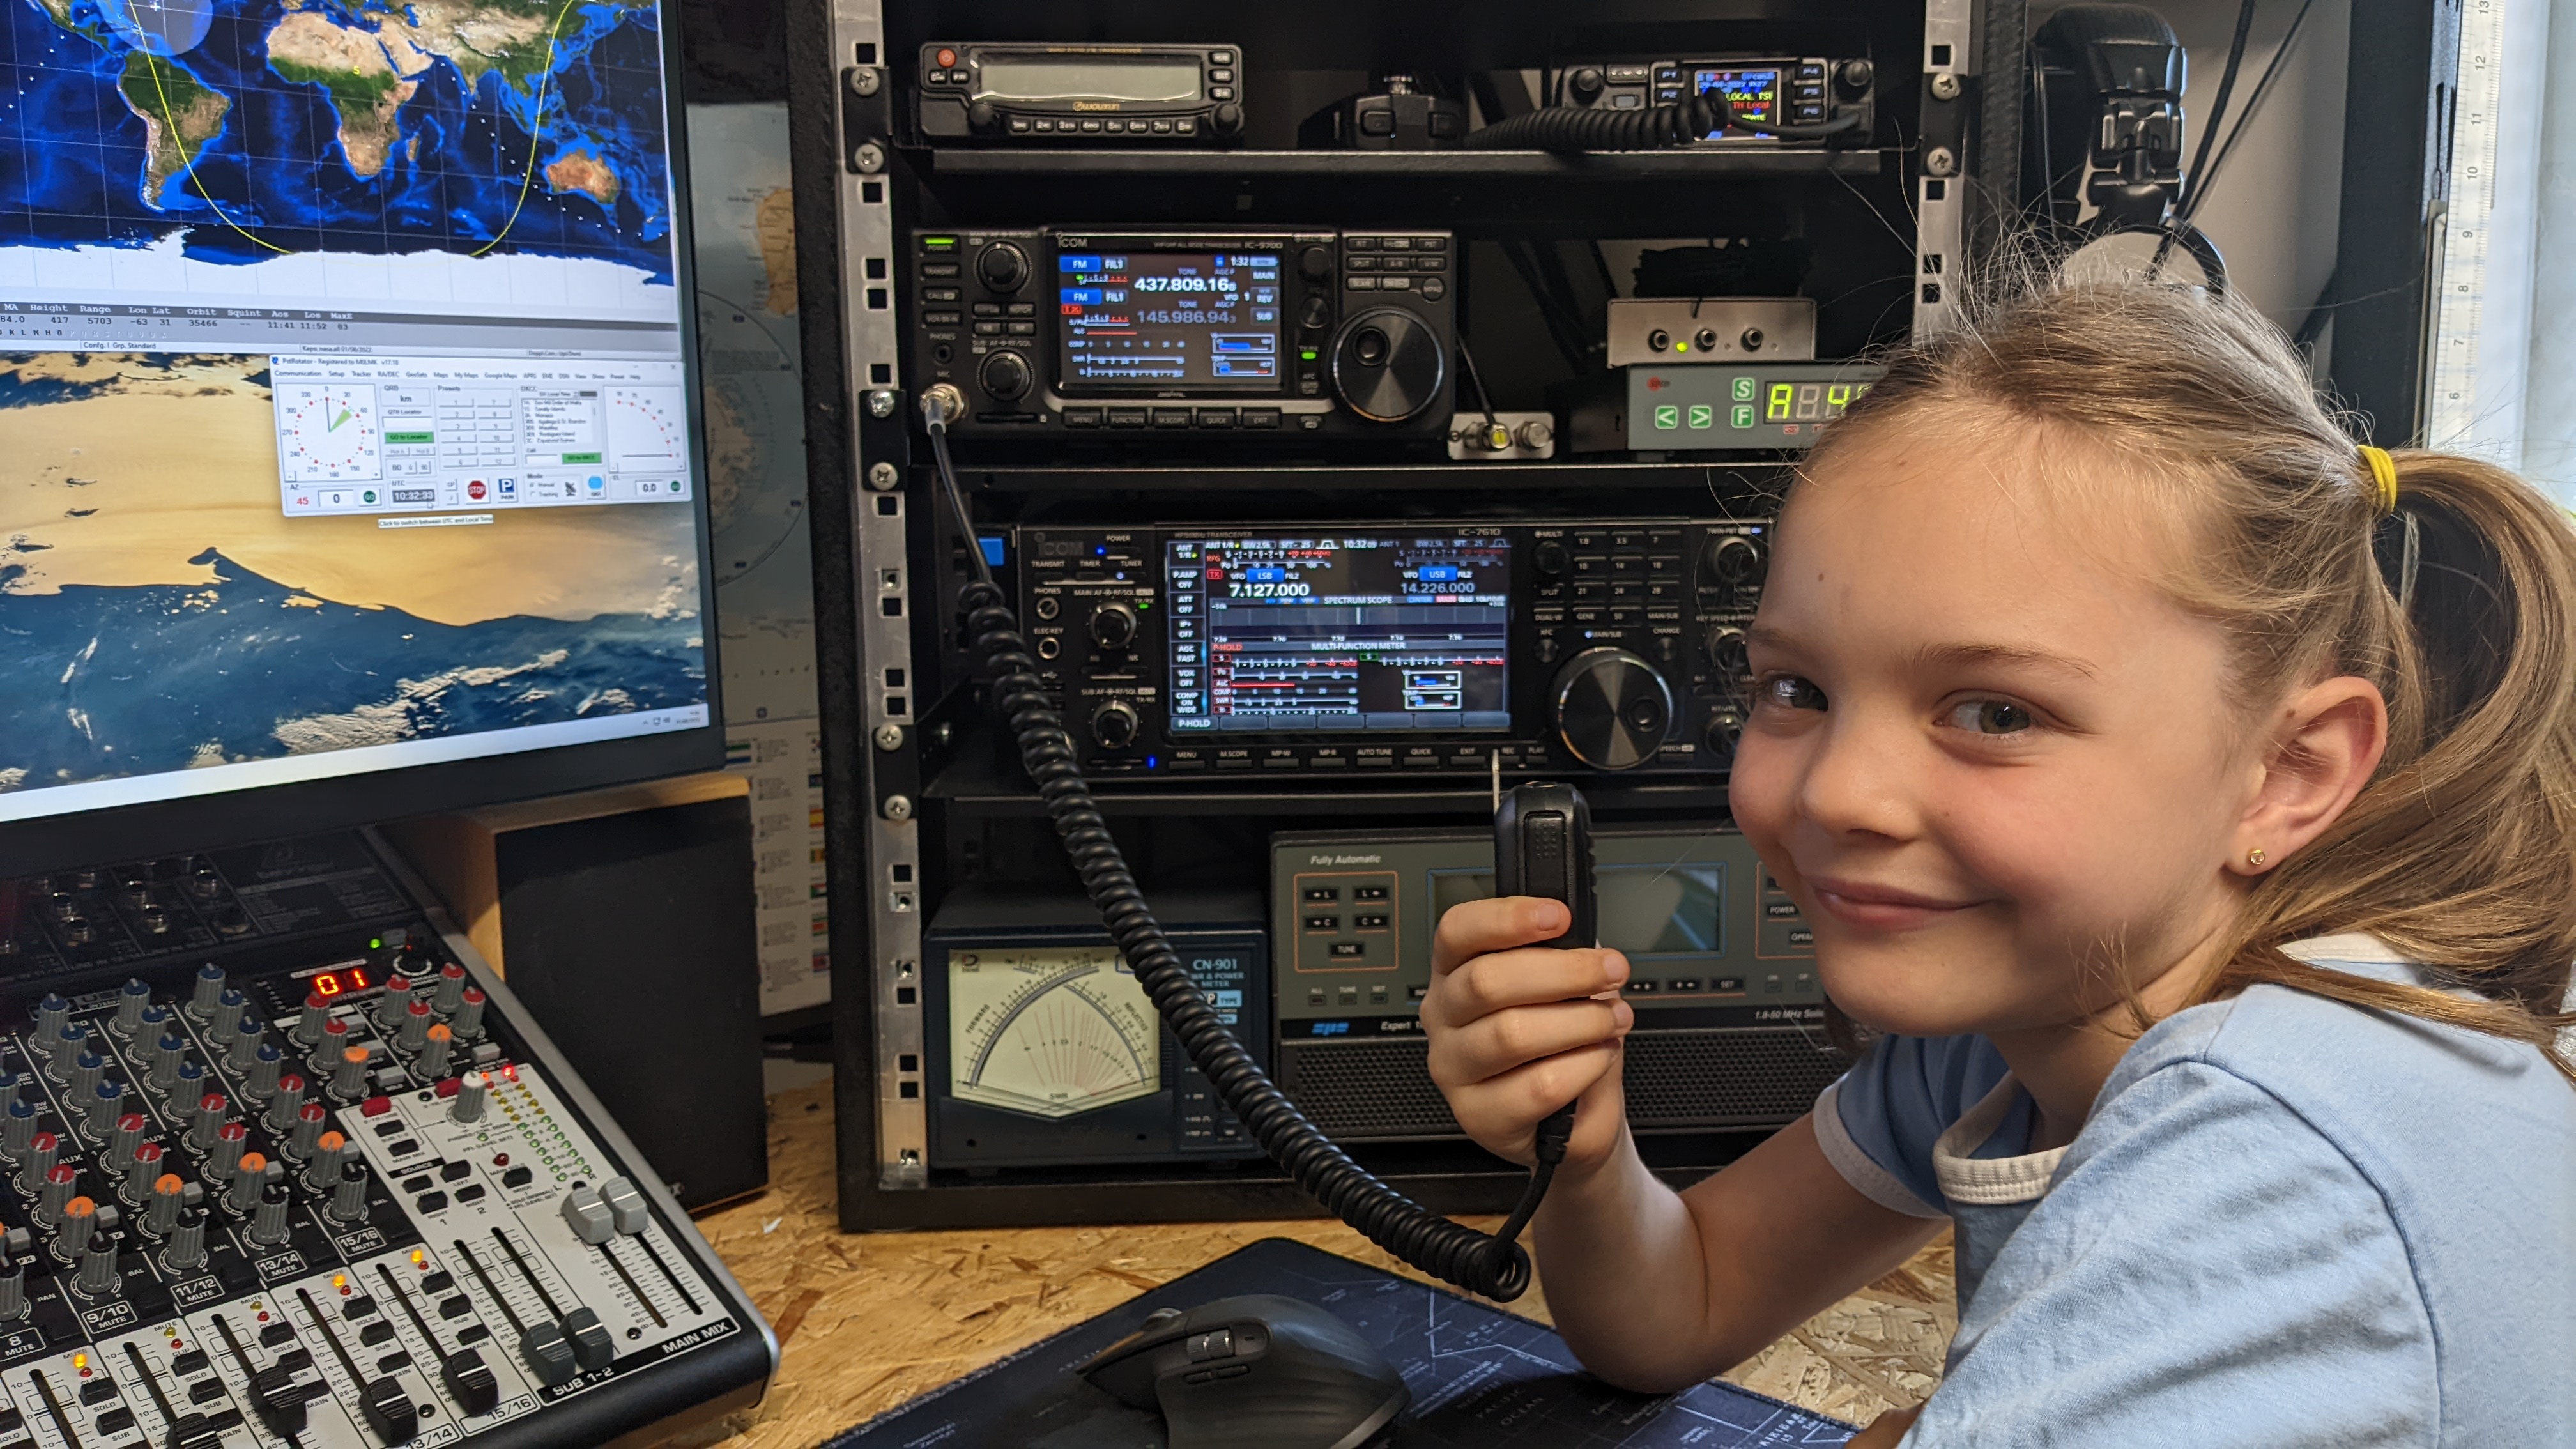 Eight-year-old makes contact with astronaut in space via dads amateur radio ITV News